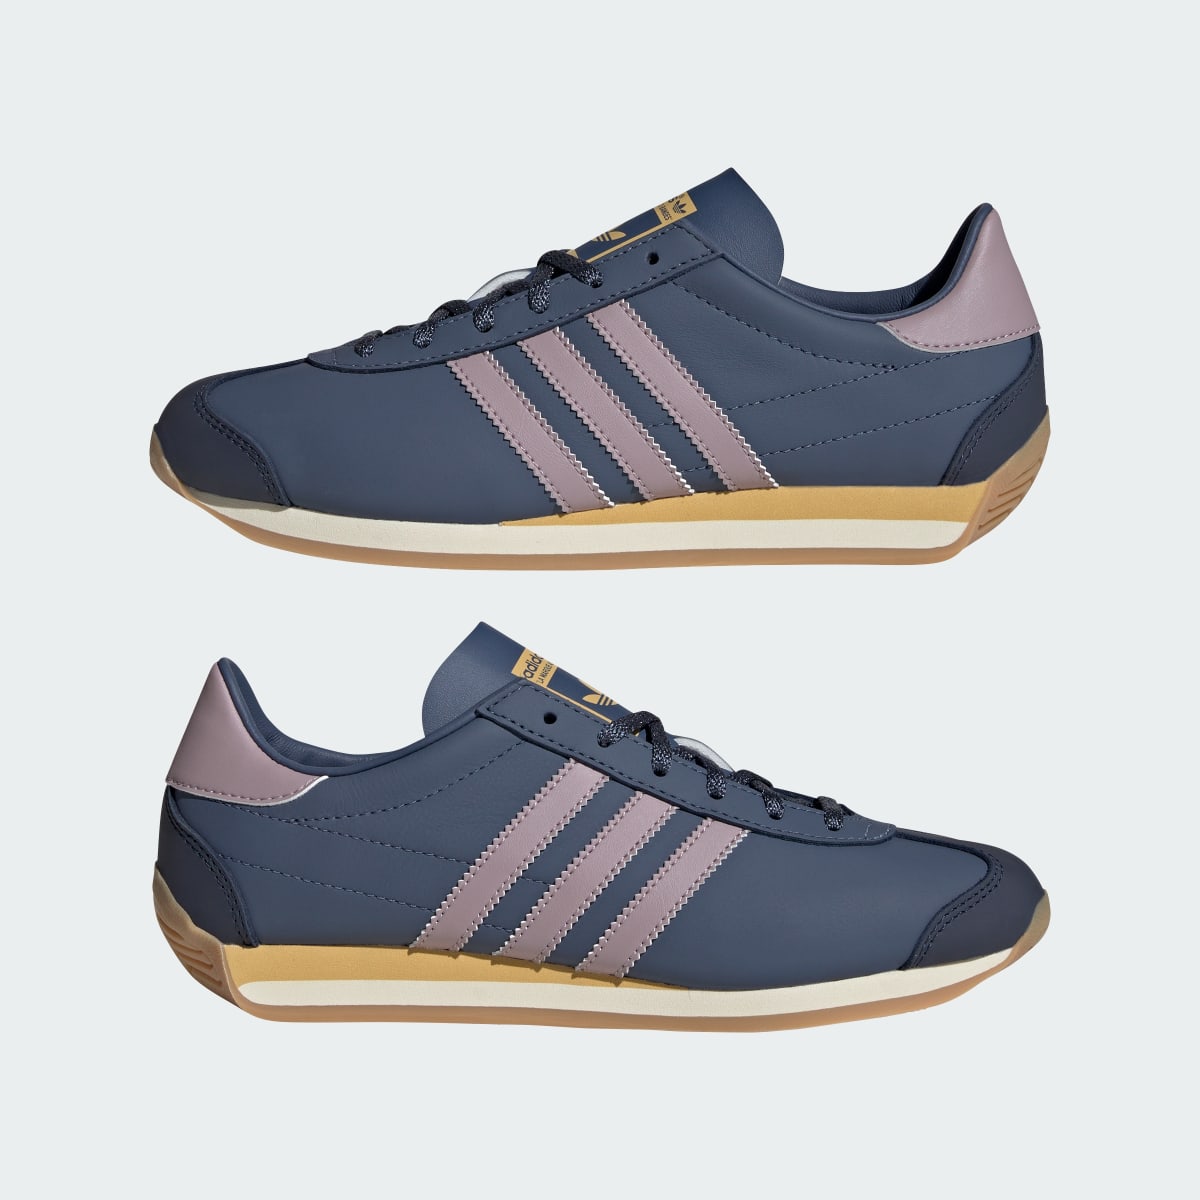 Adidas Chaussure Country OG. 8